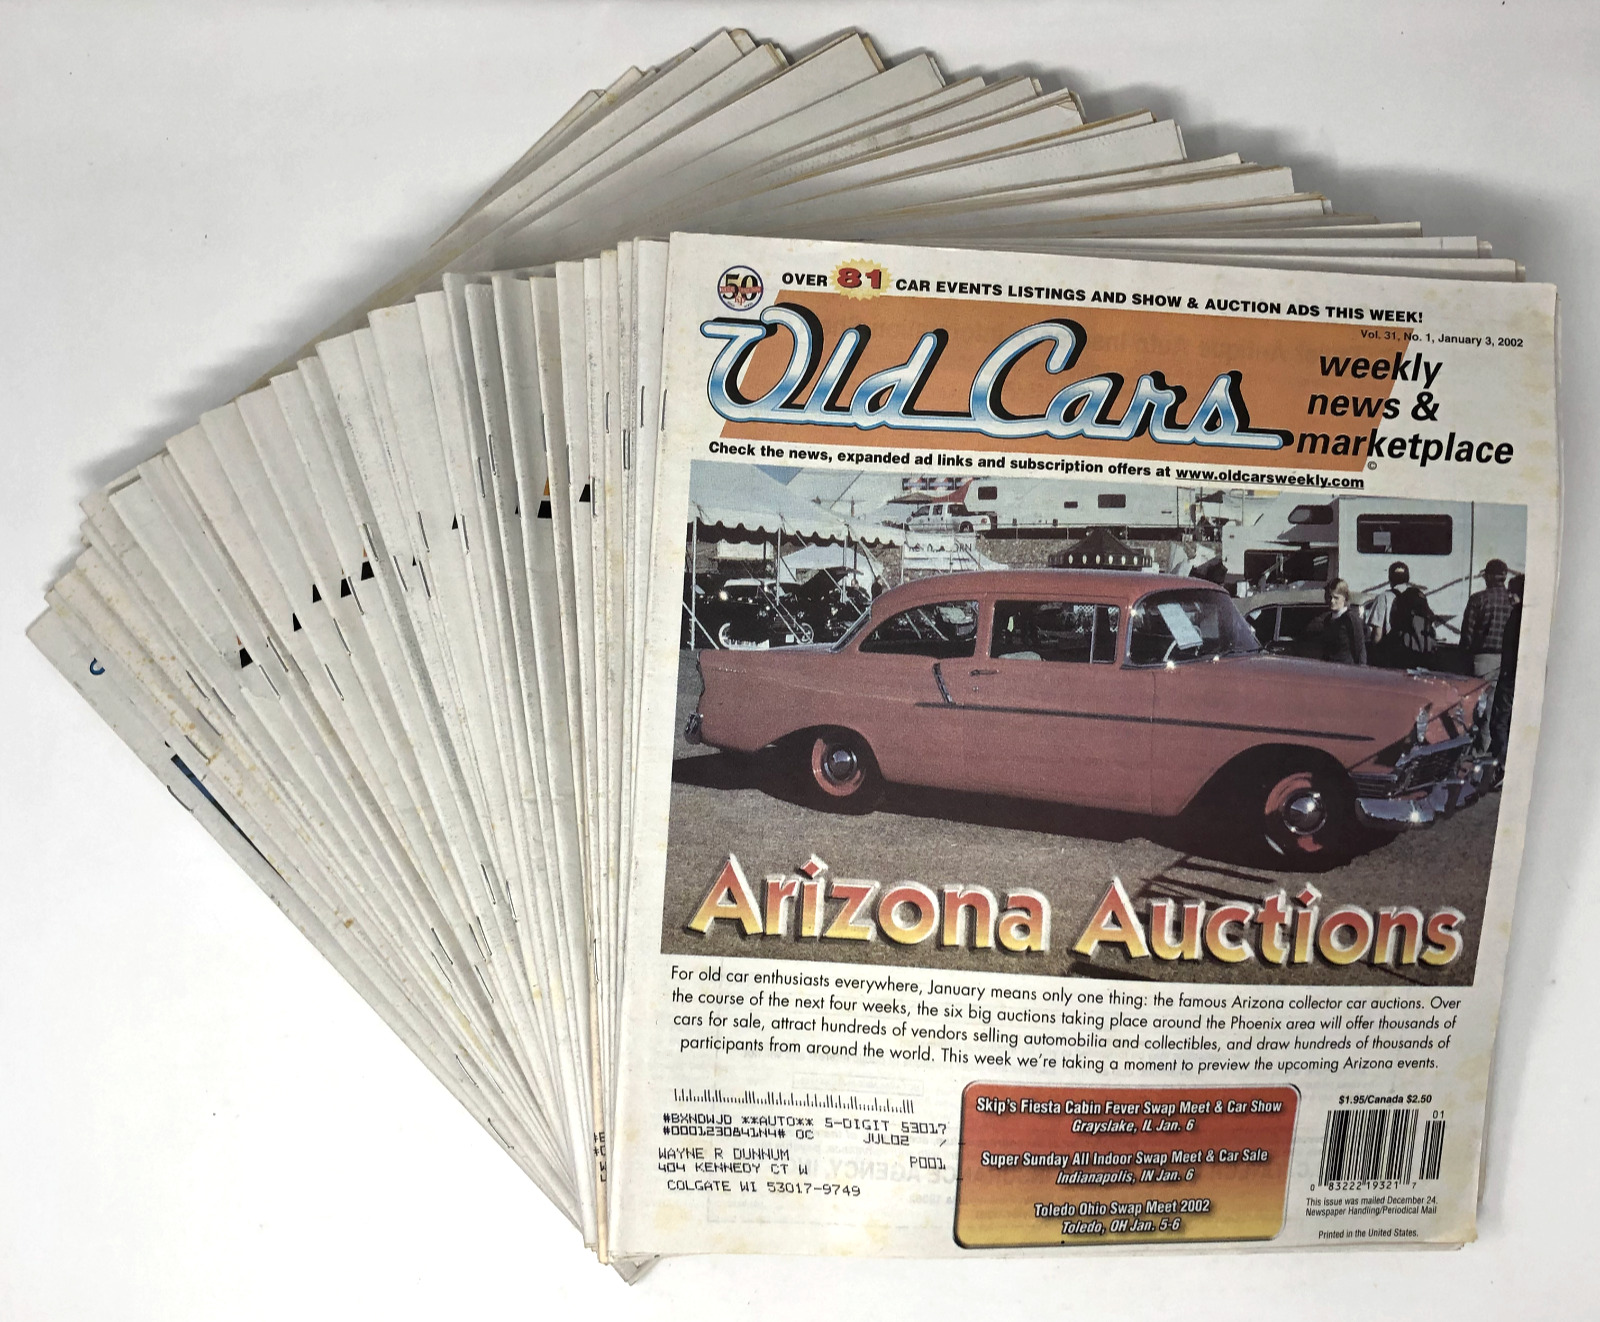 Lot of 40+ Old Cars Weekly News and Marketplace 2000 2002 Iola WI Collector Car